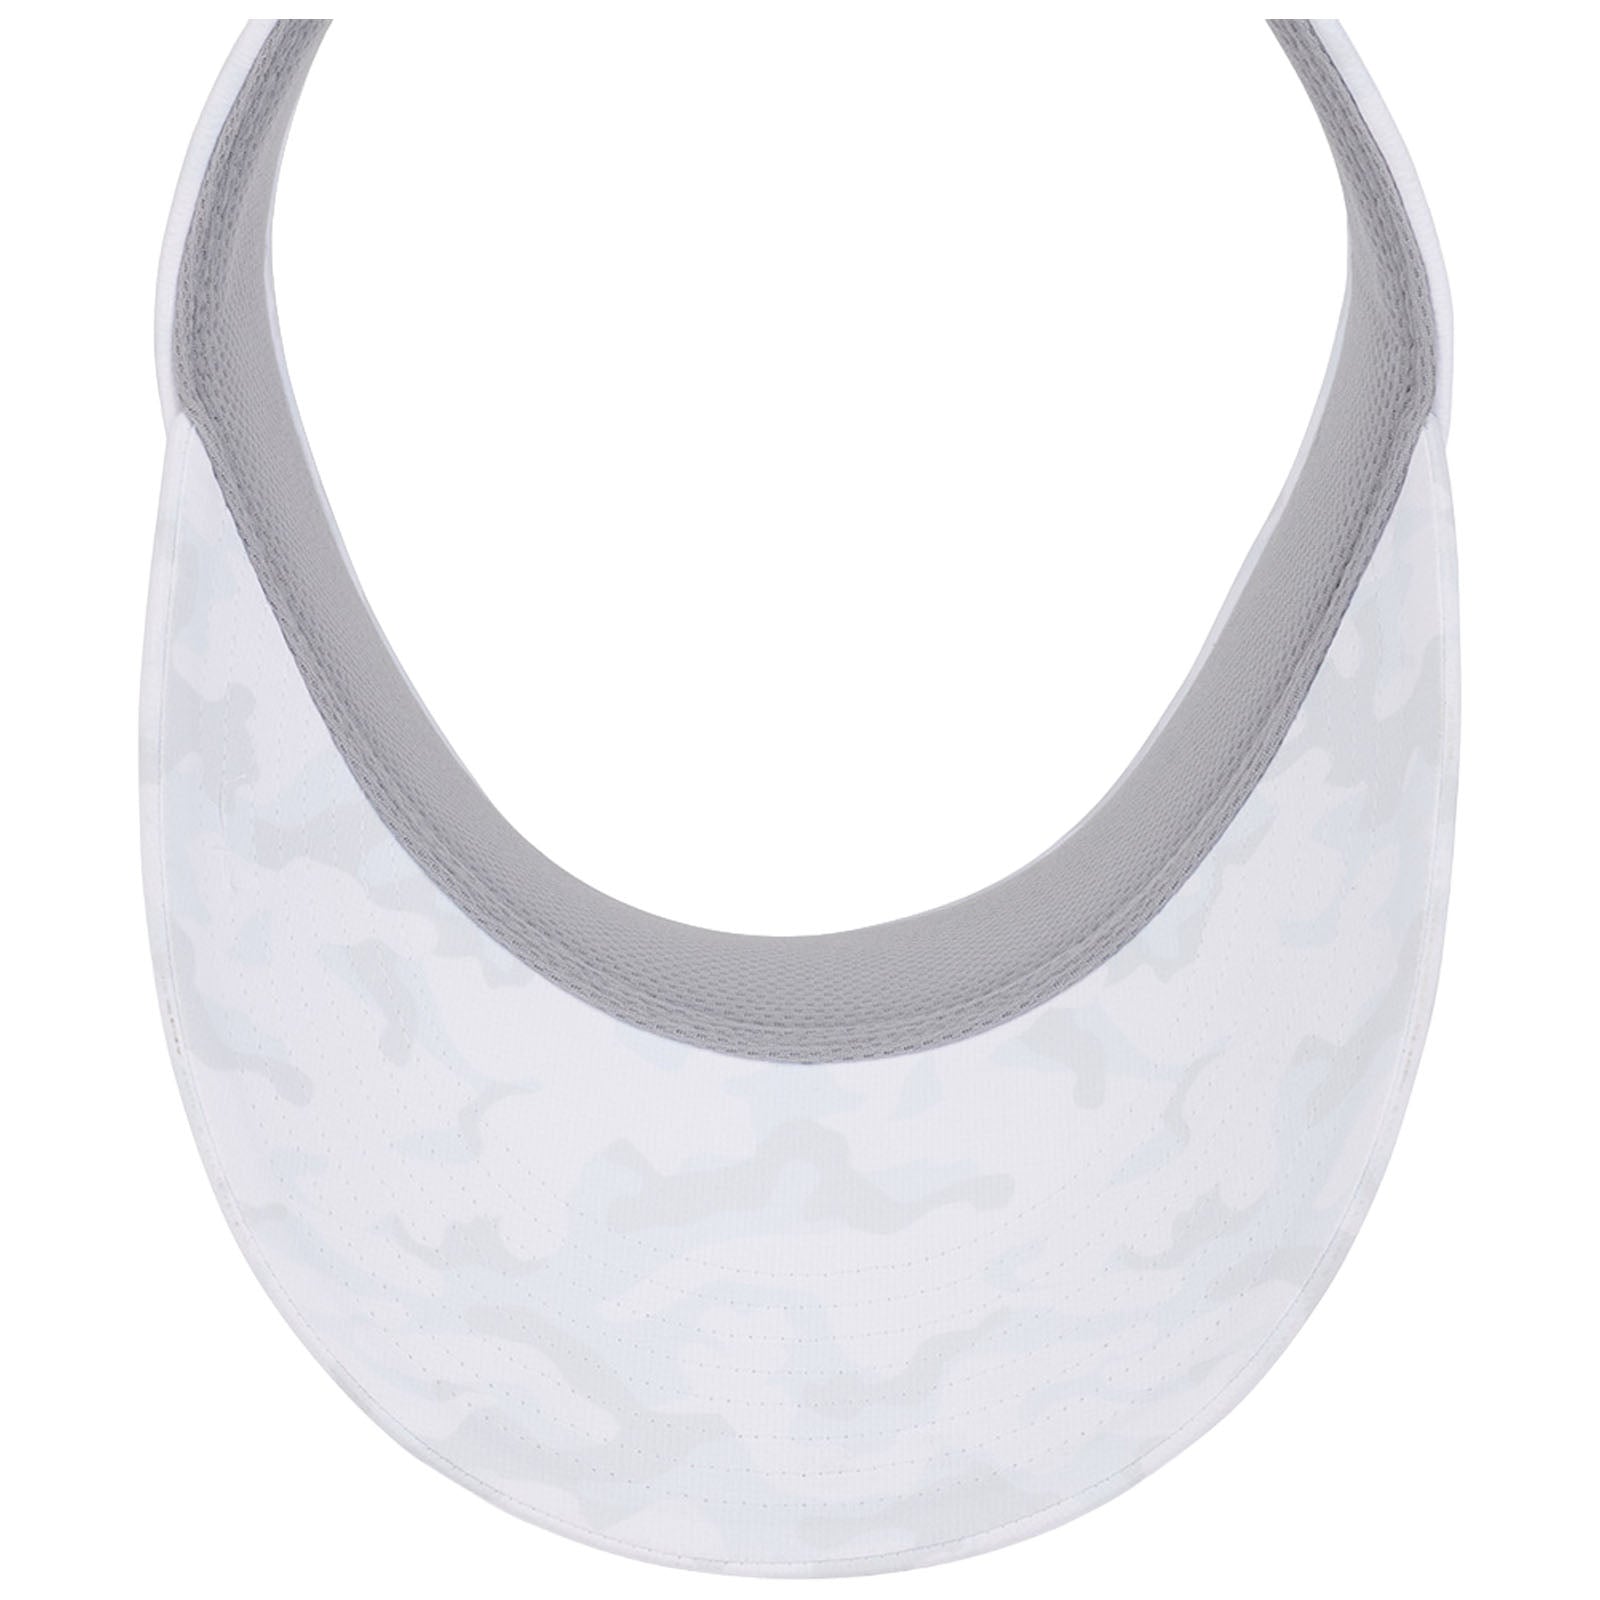 Titleist White Out Players Performance Visor